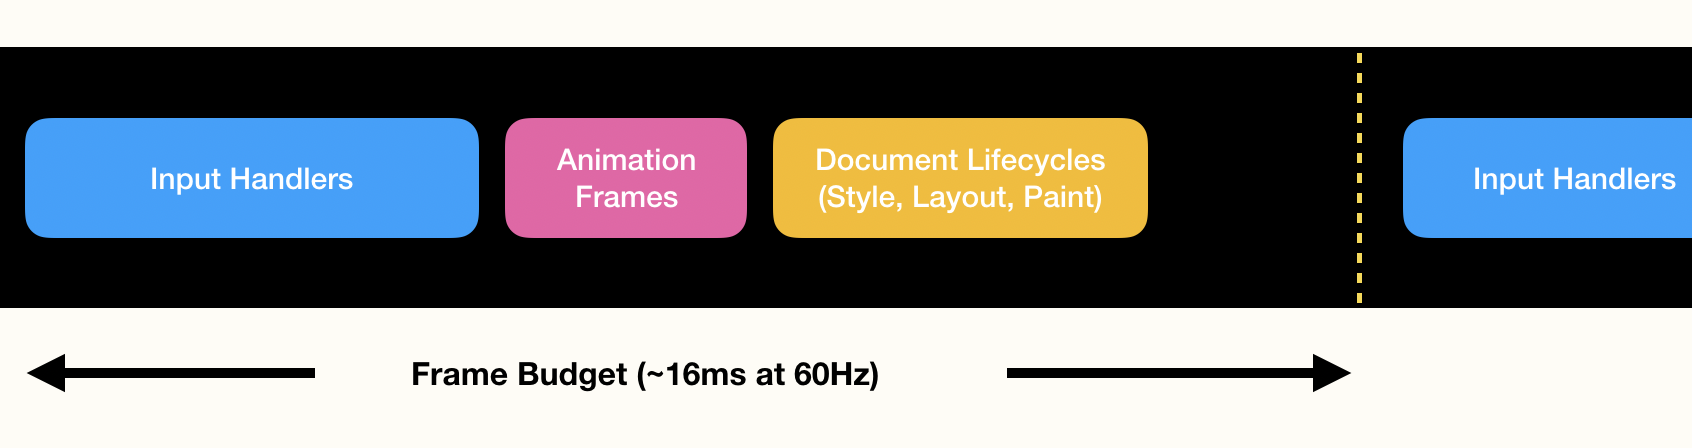 The browser event loop starts by running input handlers. Then it runs animation frame callbacks, and it ends with document lifecycles (style, layout, paint). All of this should complete within one frame, which is approximately 16ms on a 60Hz display.